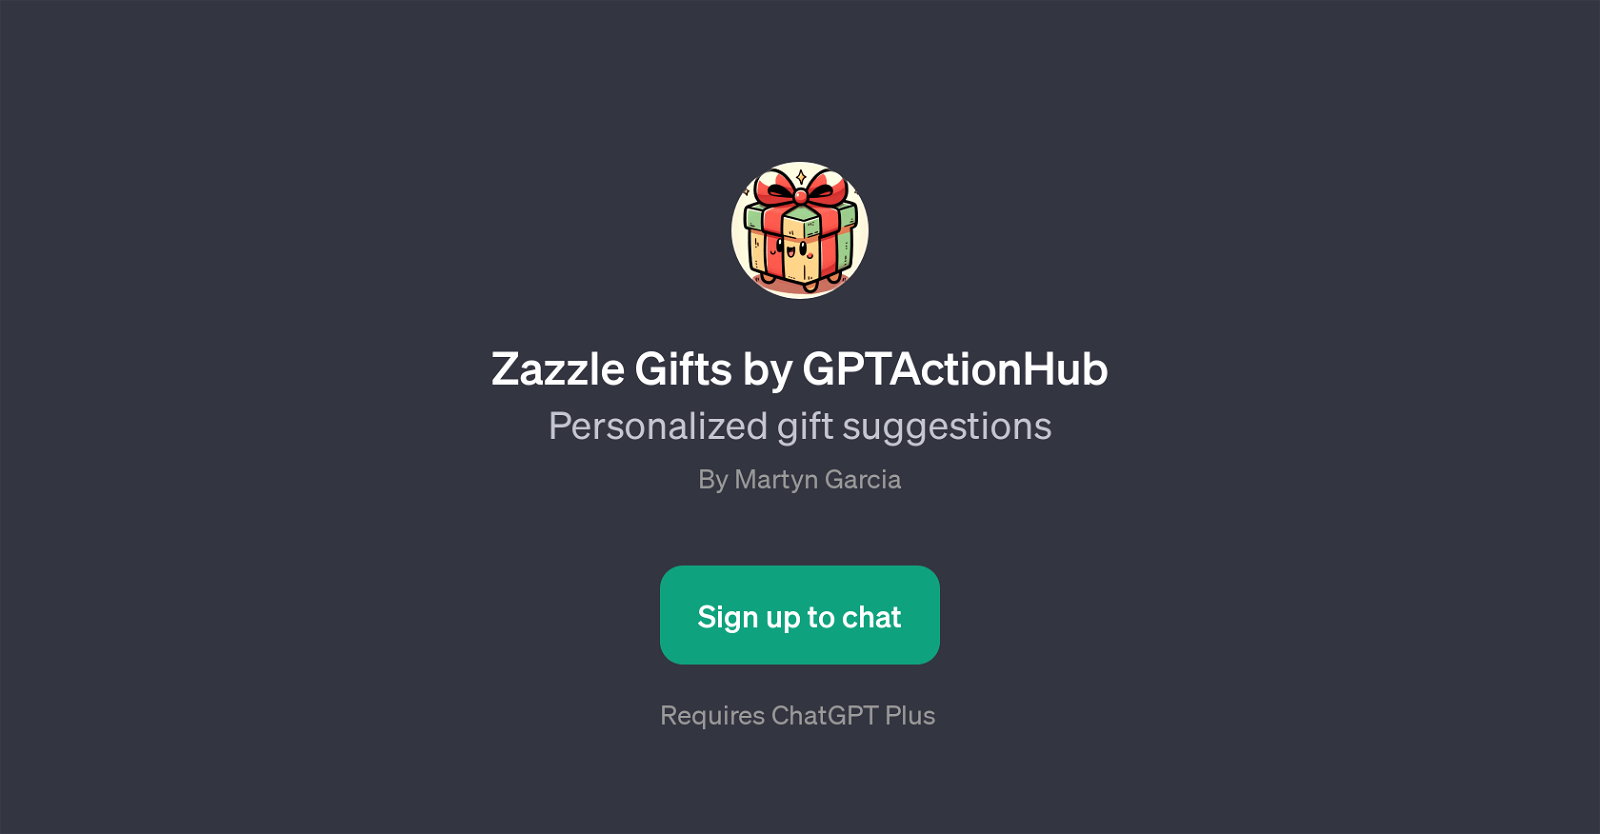 Zazzle Gifts by GPTActionHub website